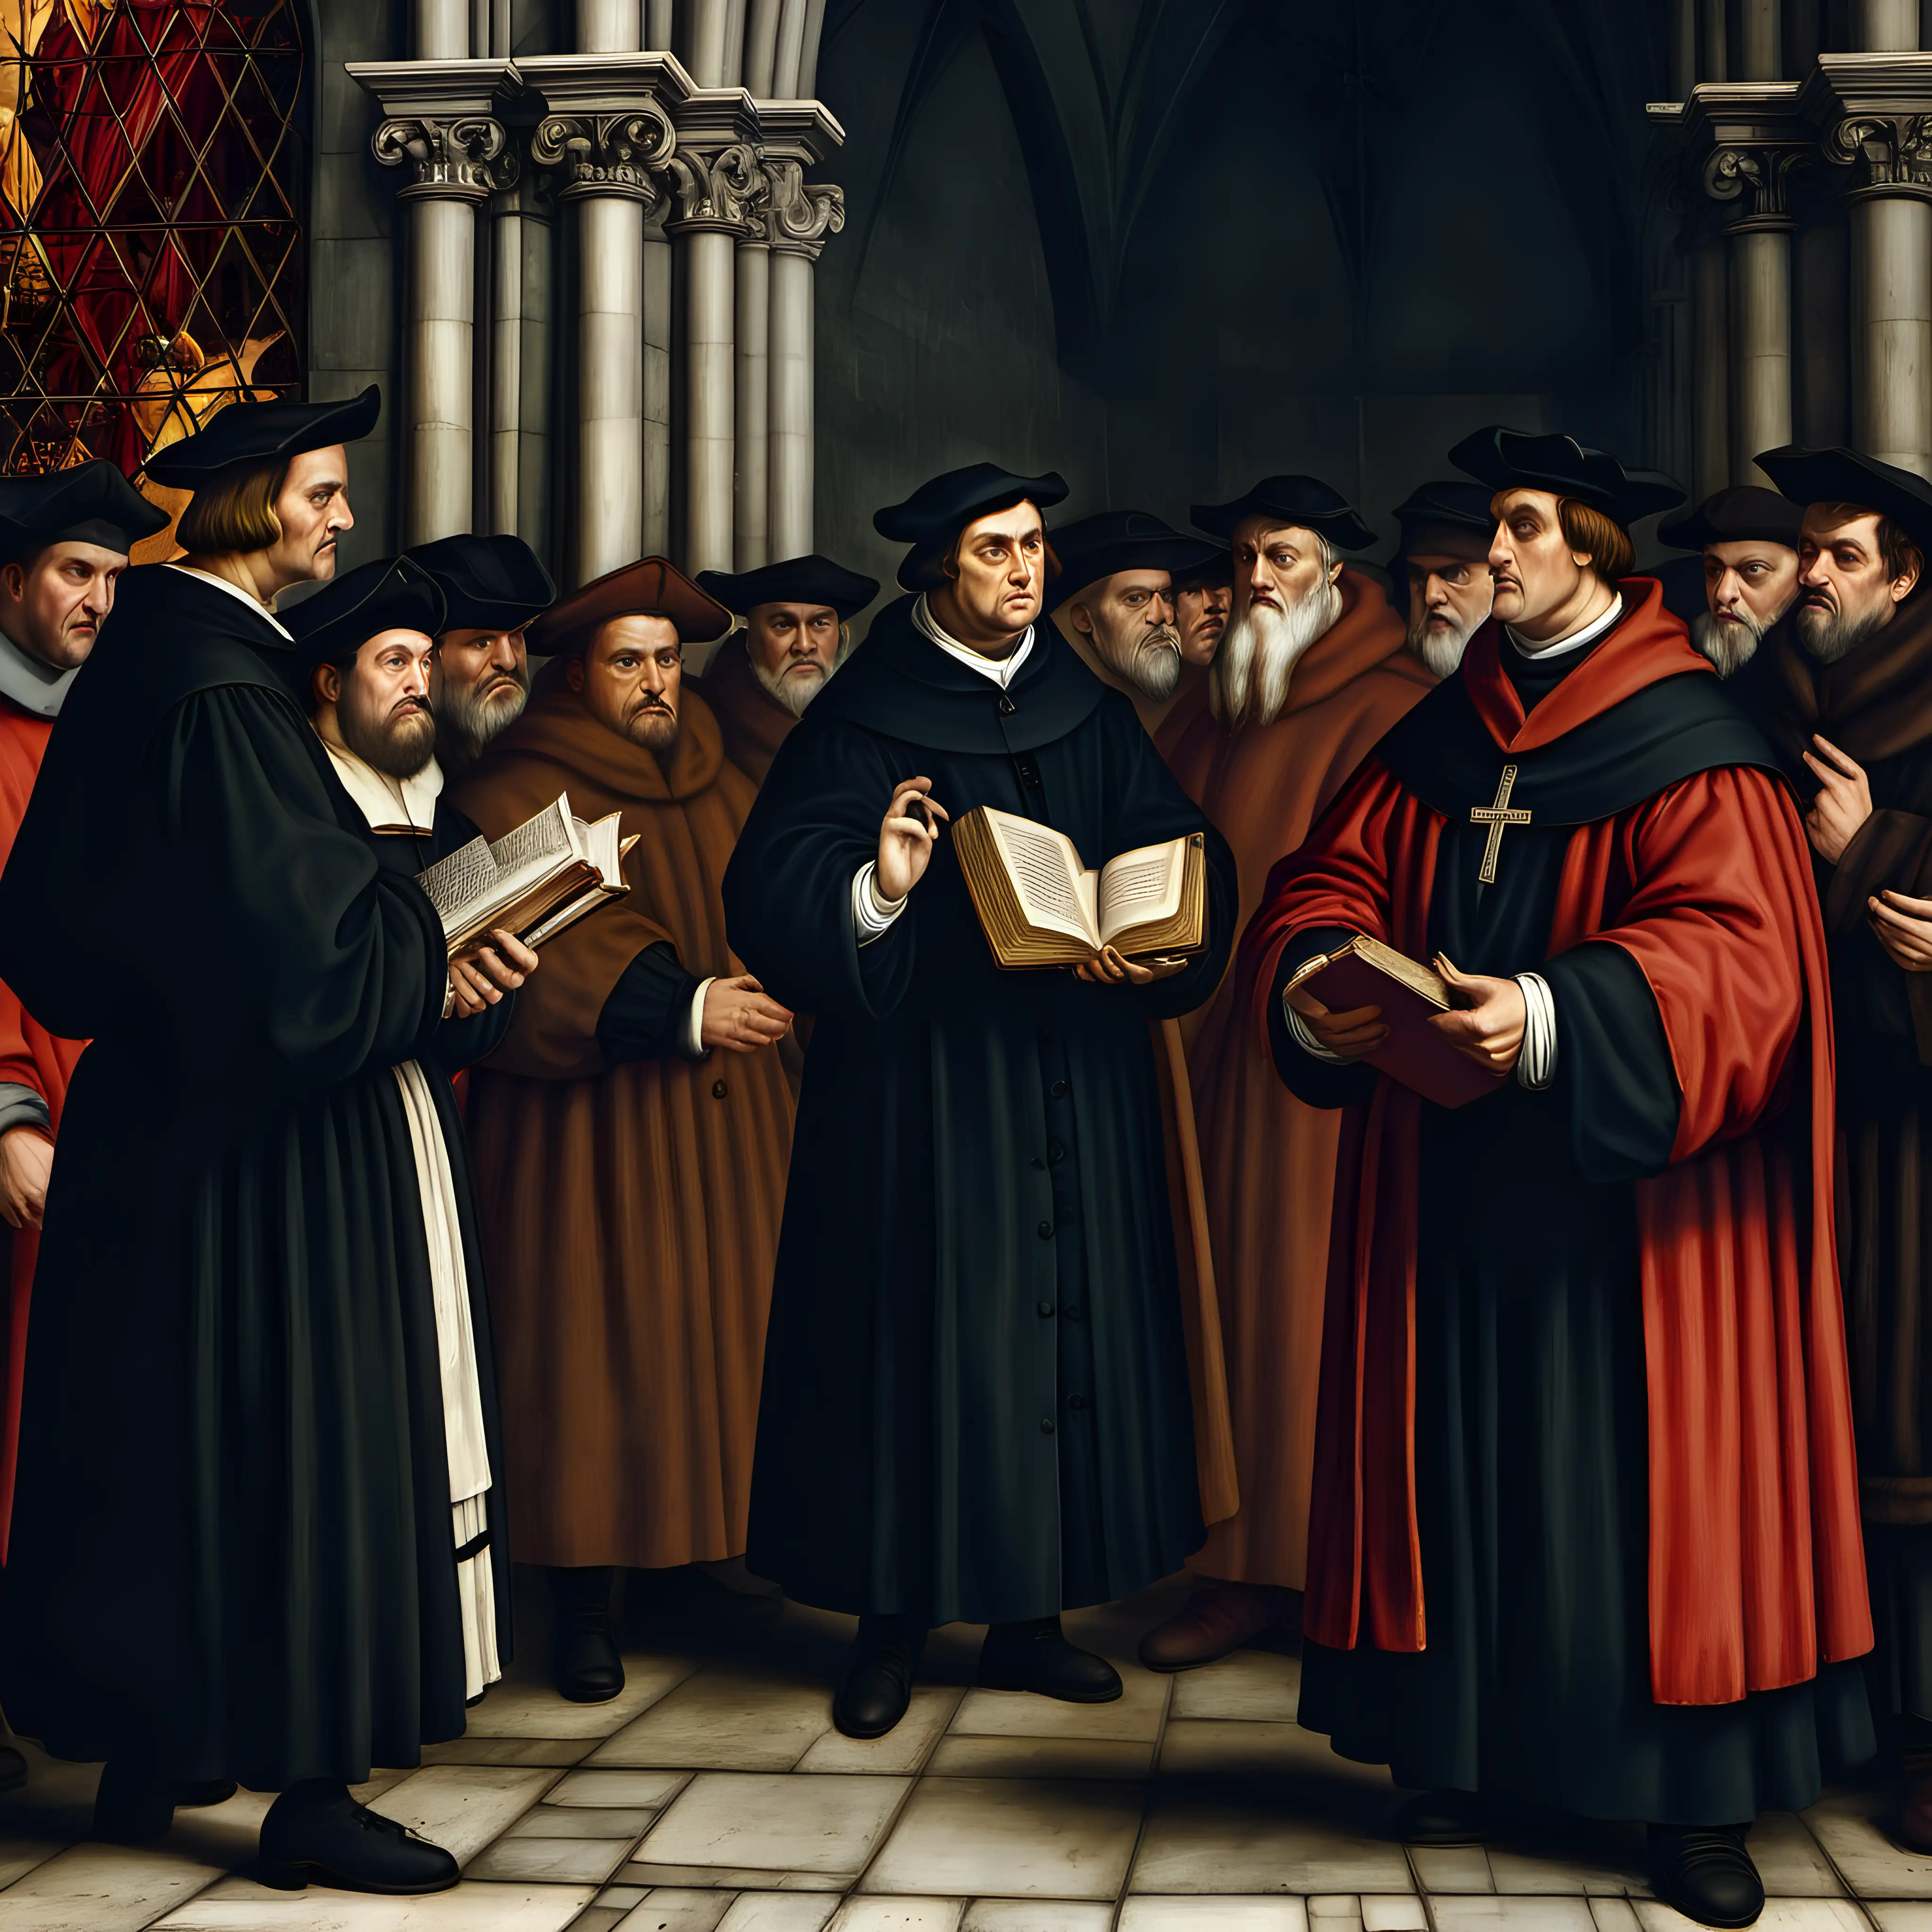 Historical Illustration of the Protestant Reformation Movement